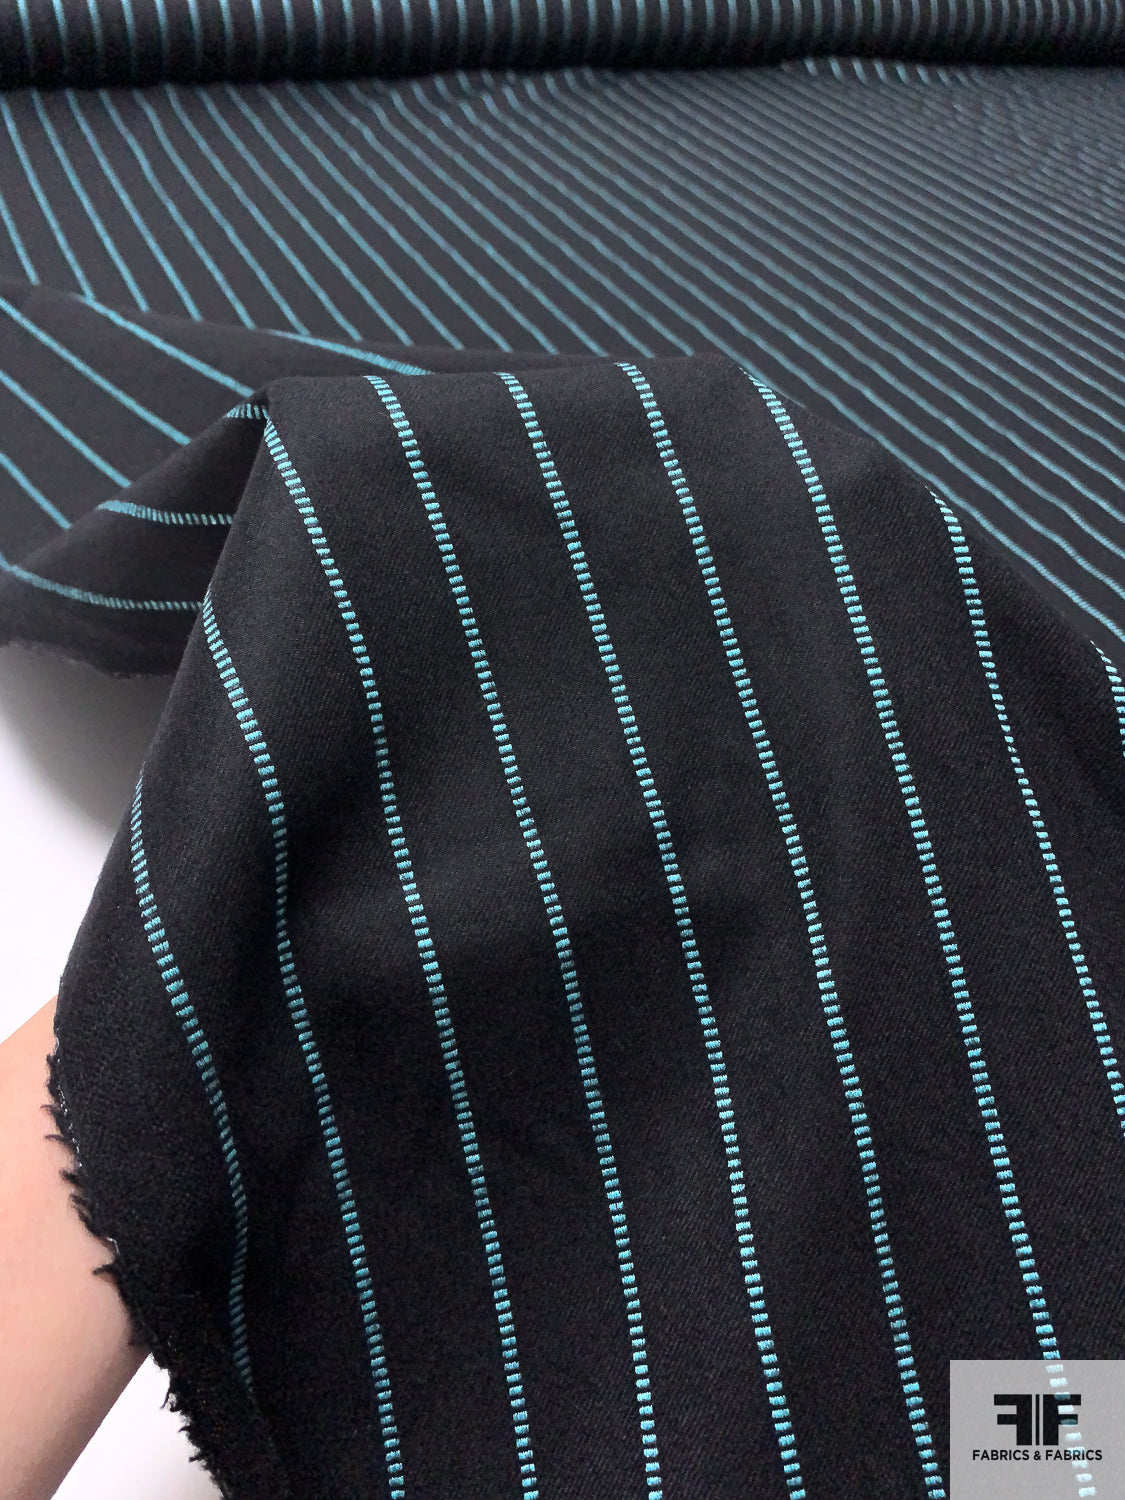 Italian Dot Striped Wool Suiting - Black / Turquoise